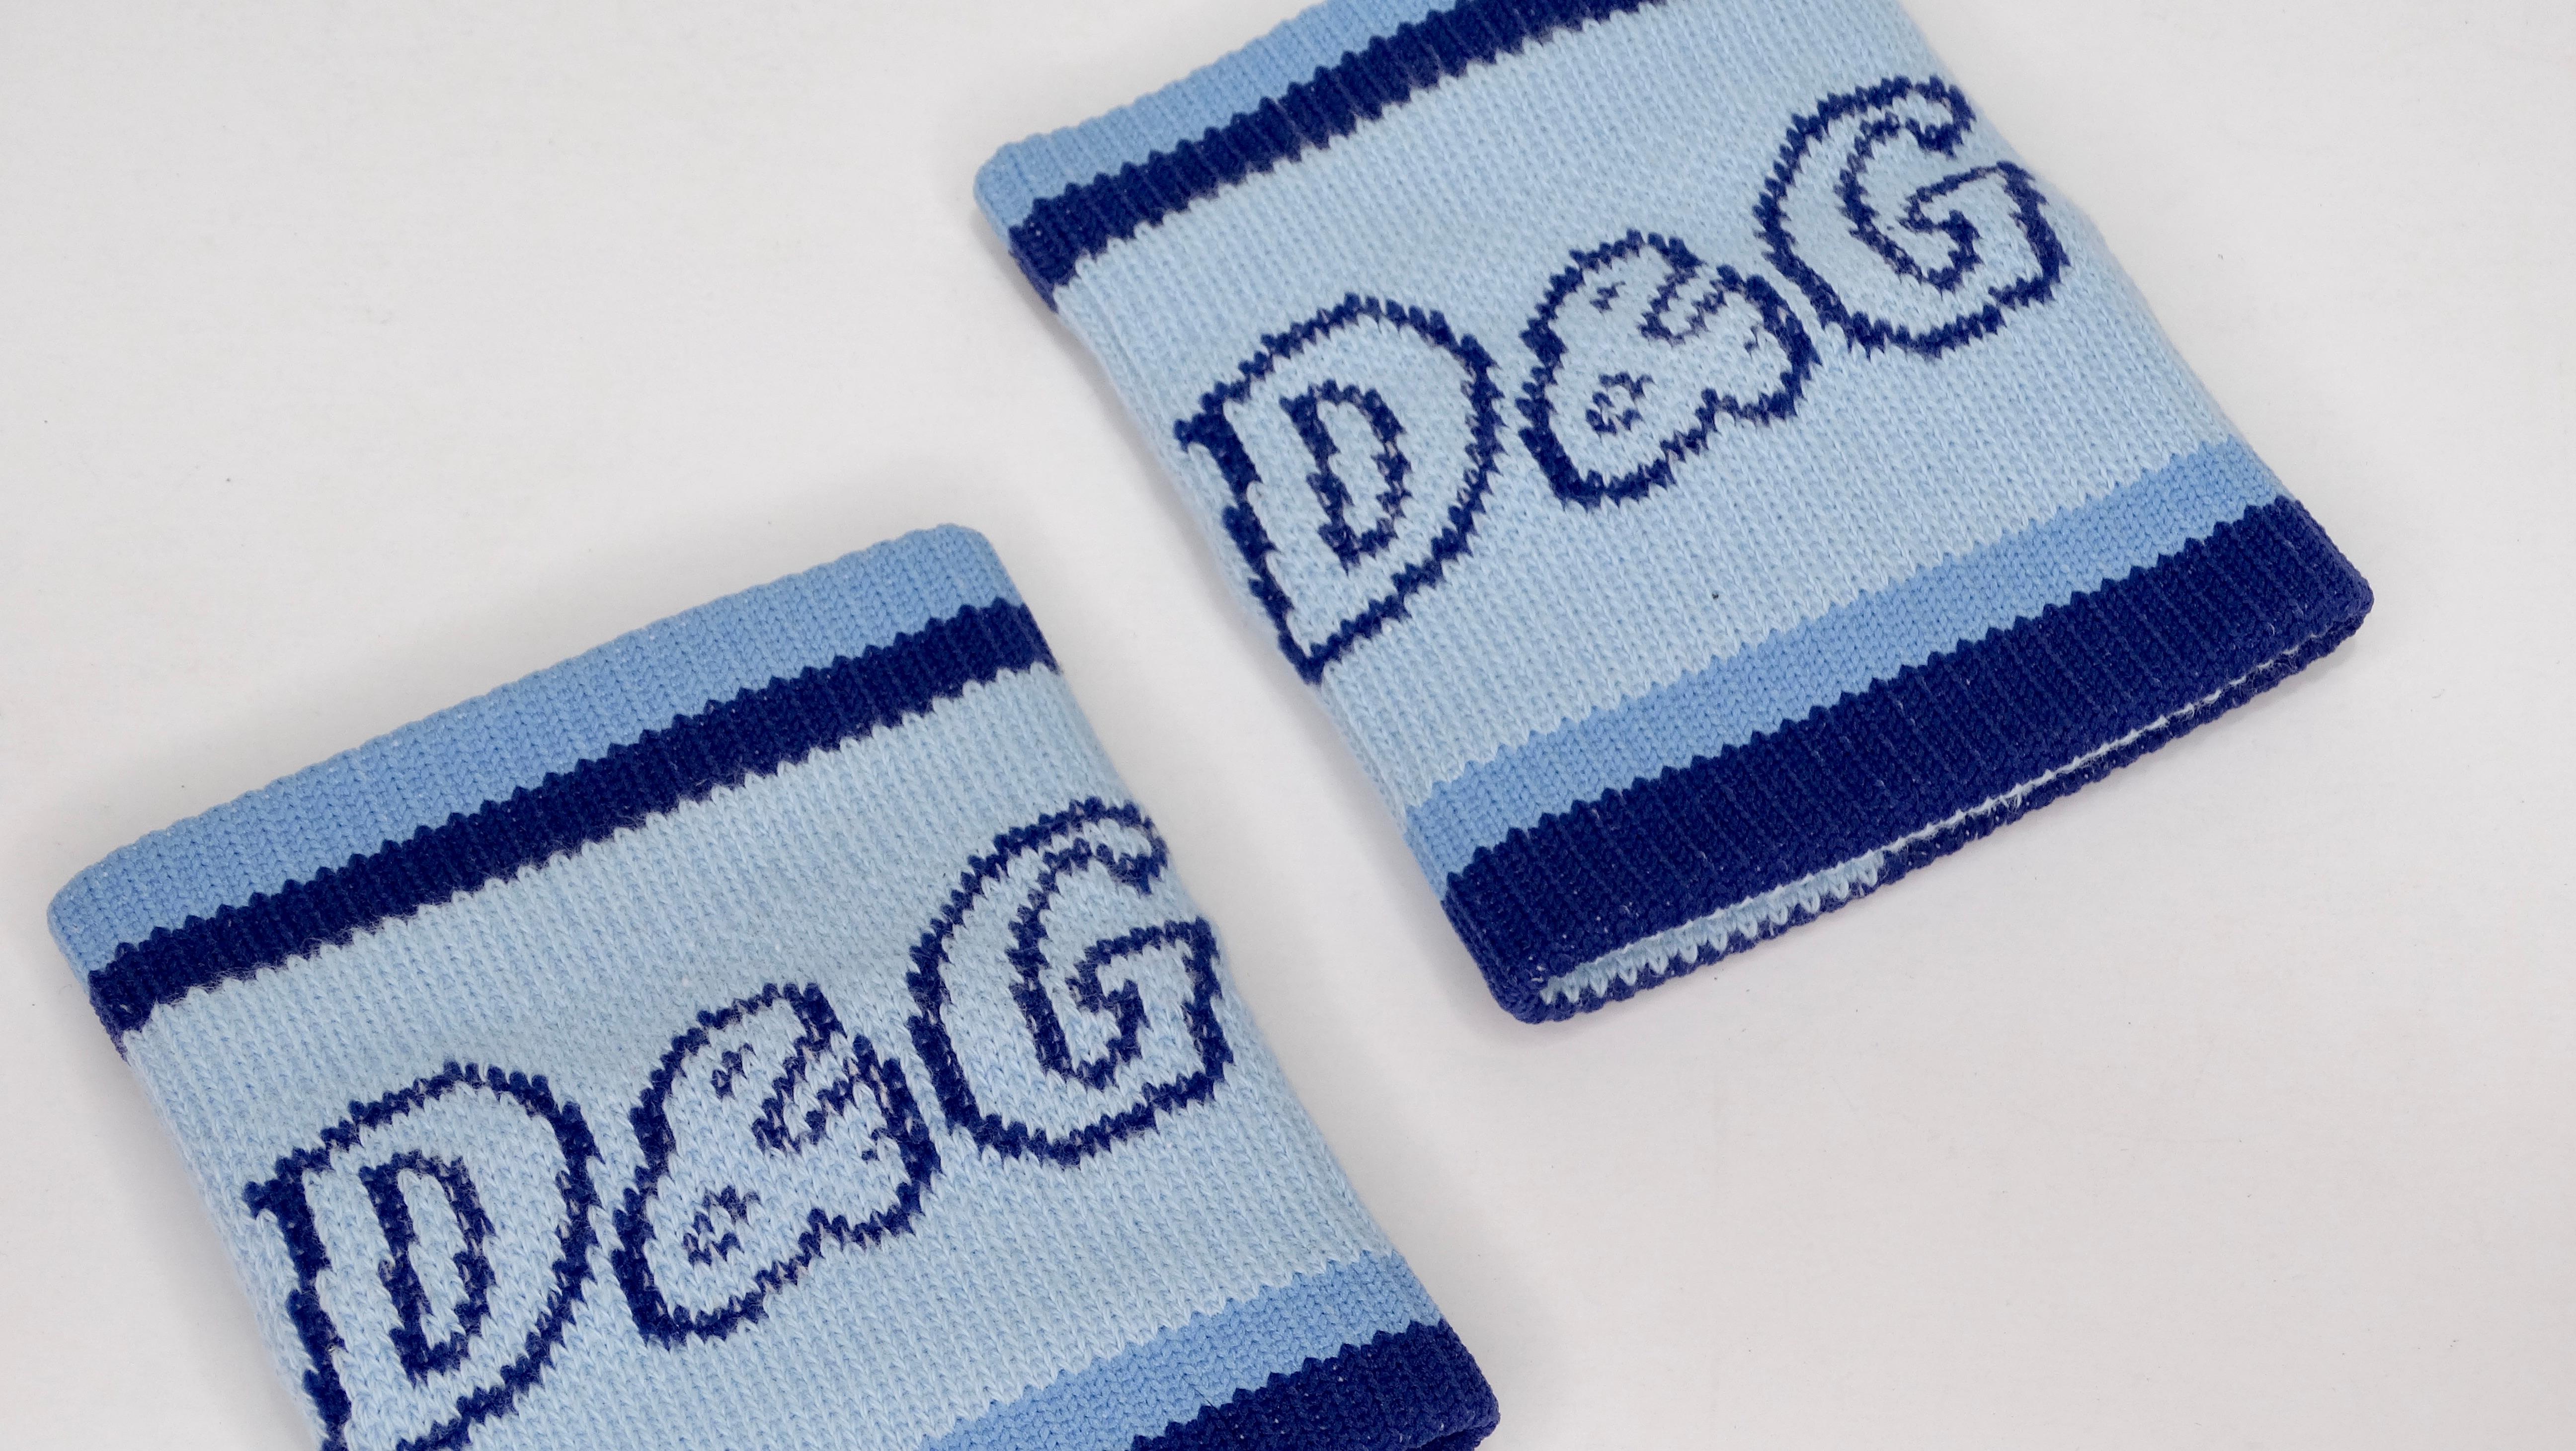 Circa early 2000s, these Dolce & Gabbana wrist sweat bands are the most iconic accessory for your look! Two tone blue fabric printed with the D&G logo on the front. Perfect to layer with your favorite bracelets, these will pair great with your